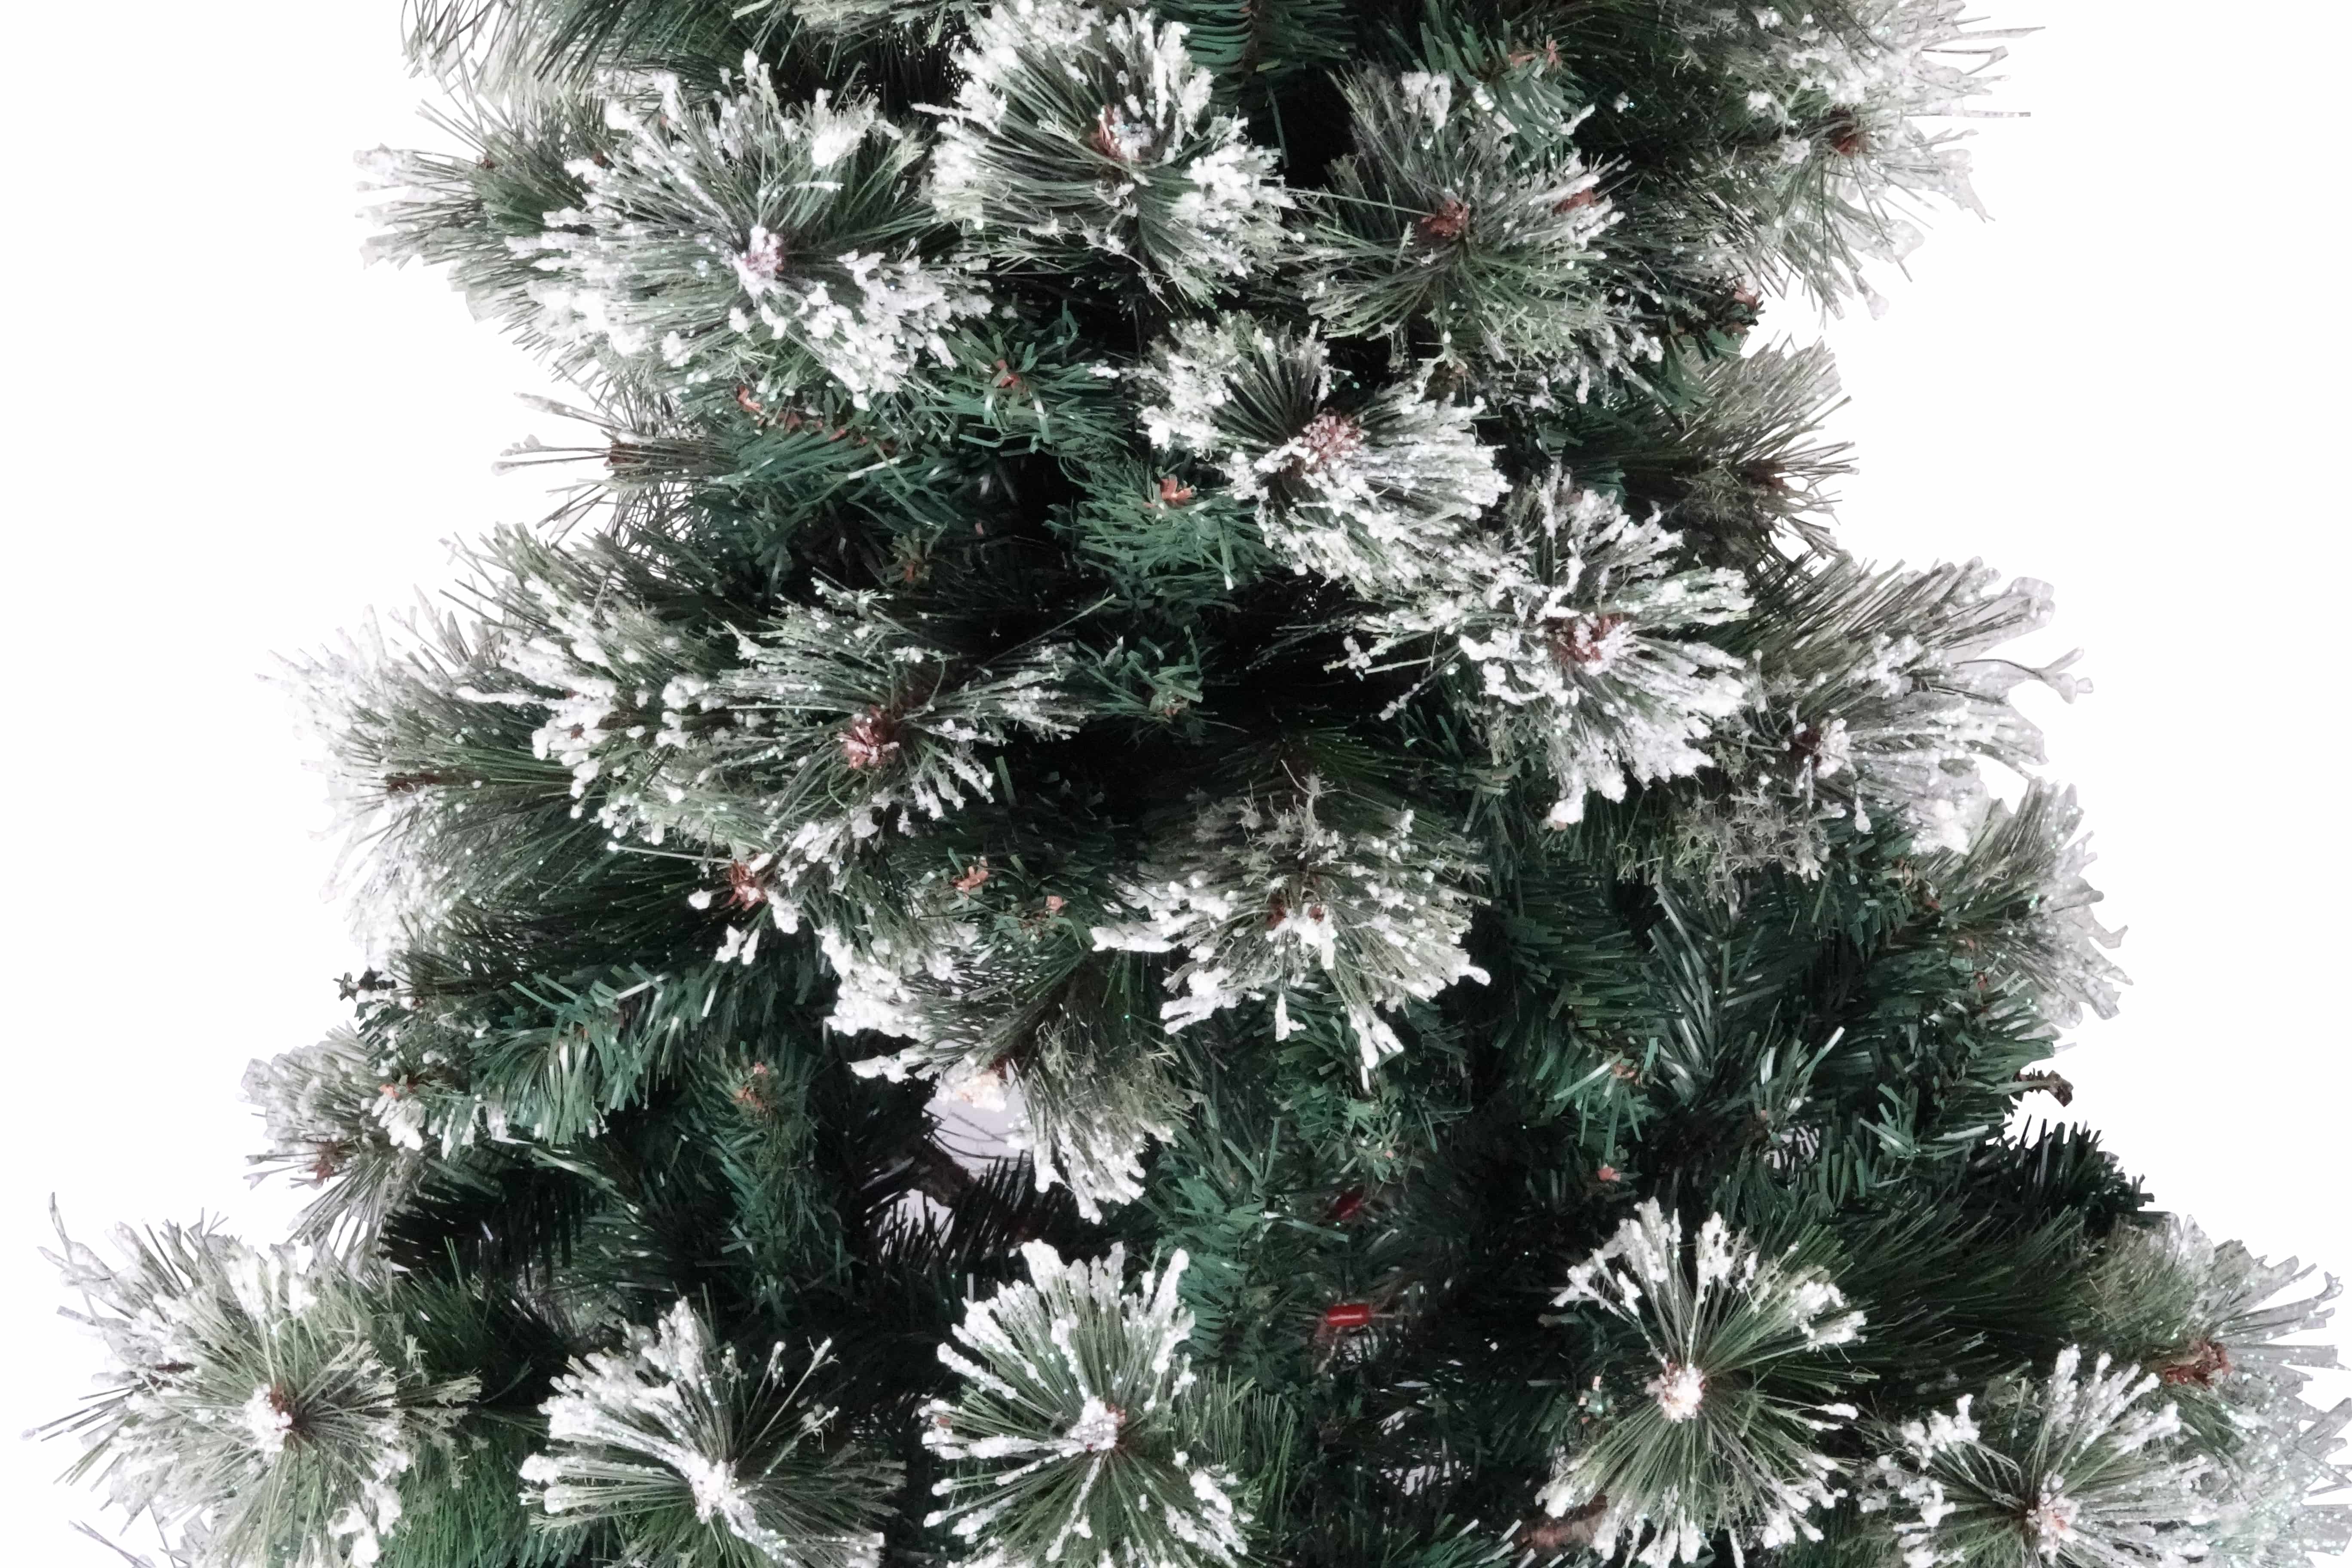 4goodz Gracious Frosted Pine Kerstboom 150 cm - Groen/Wit